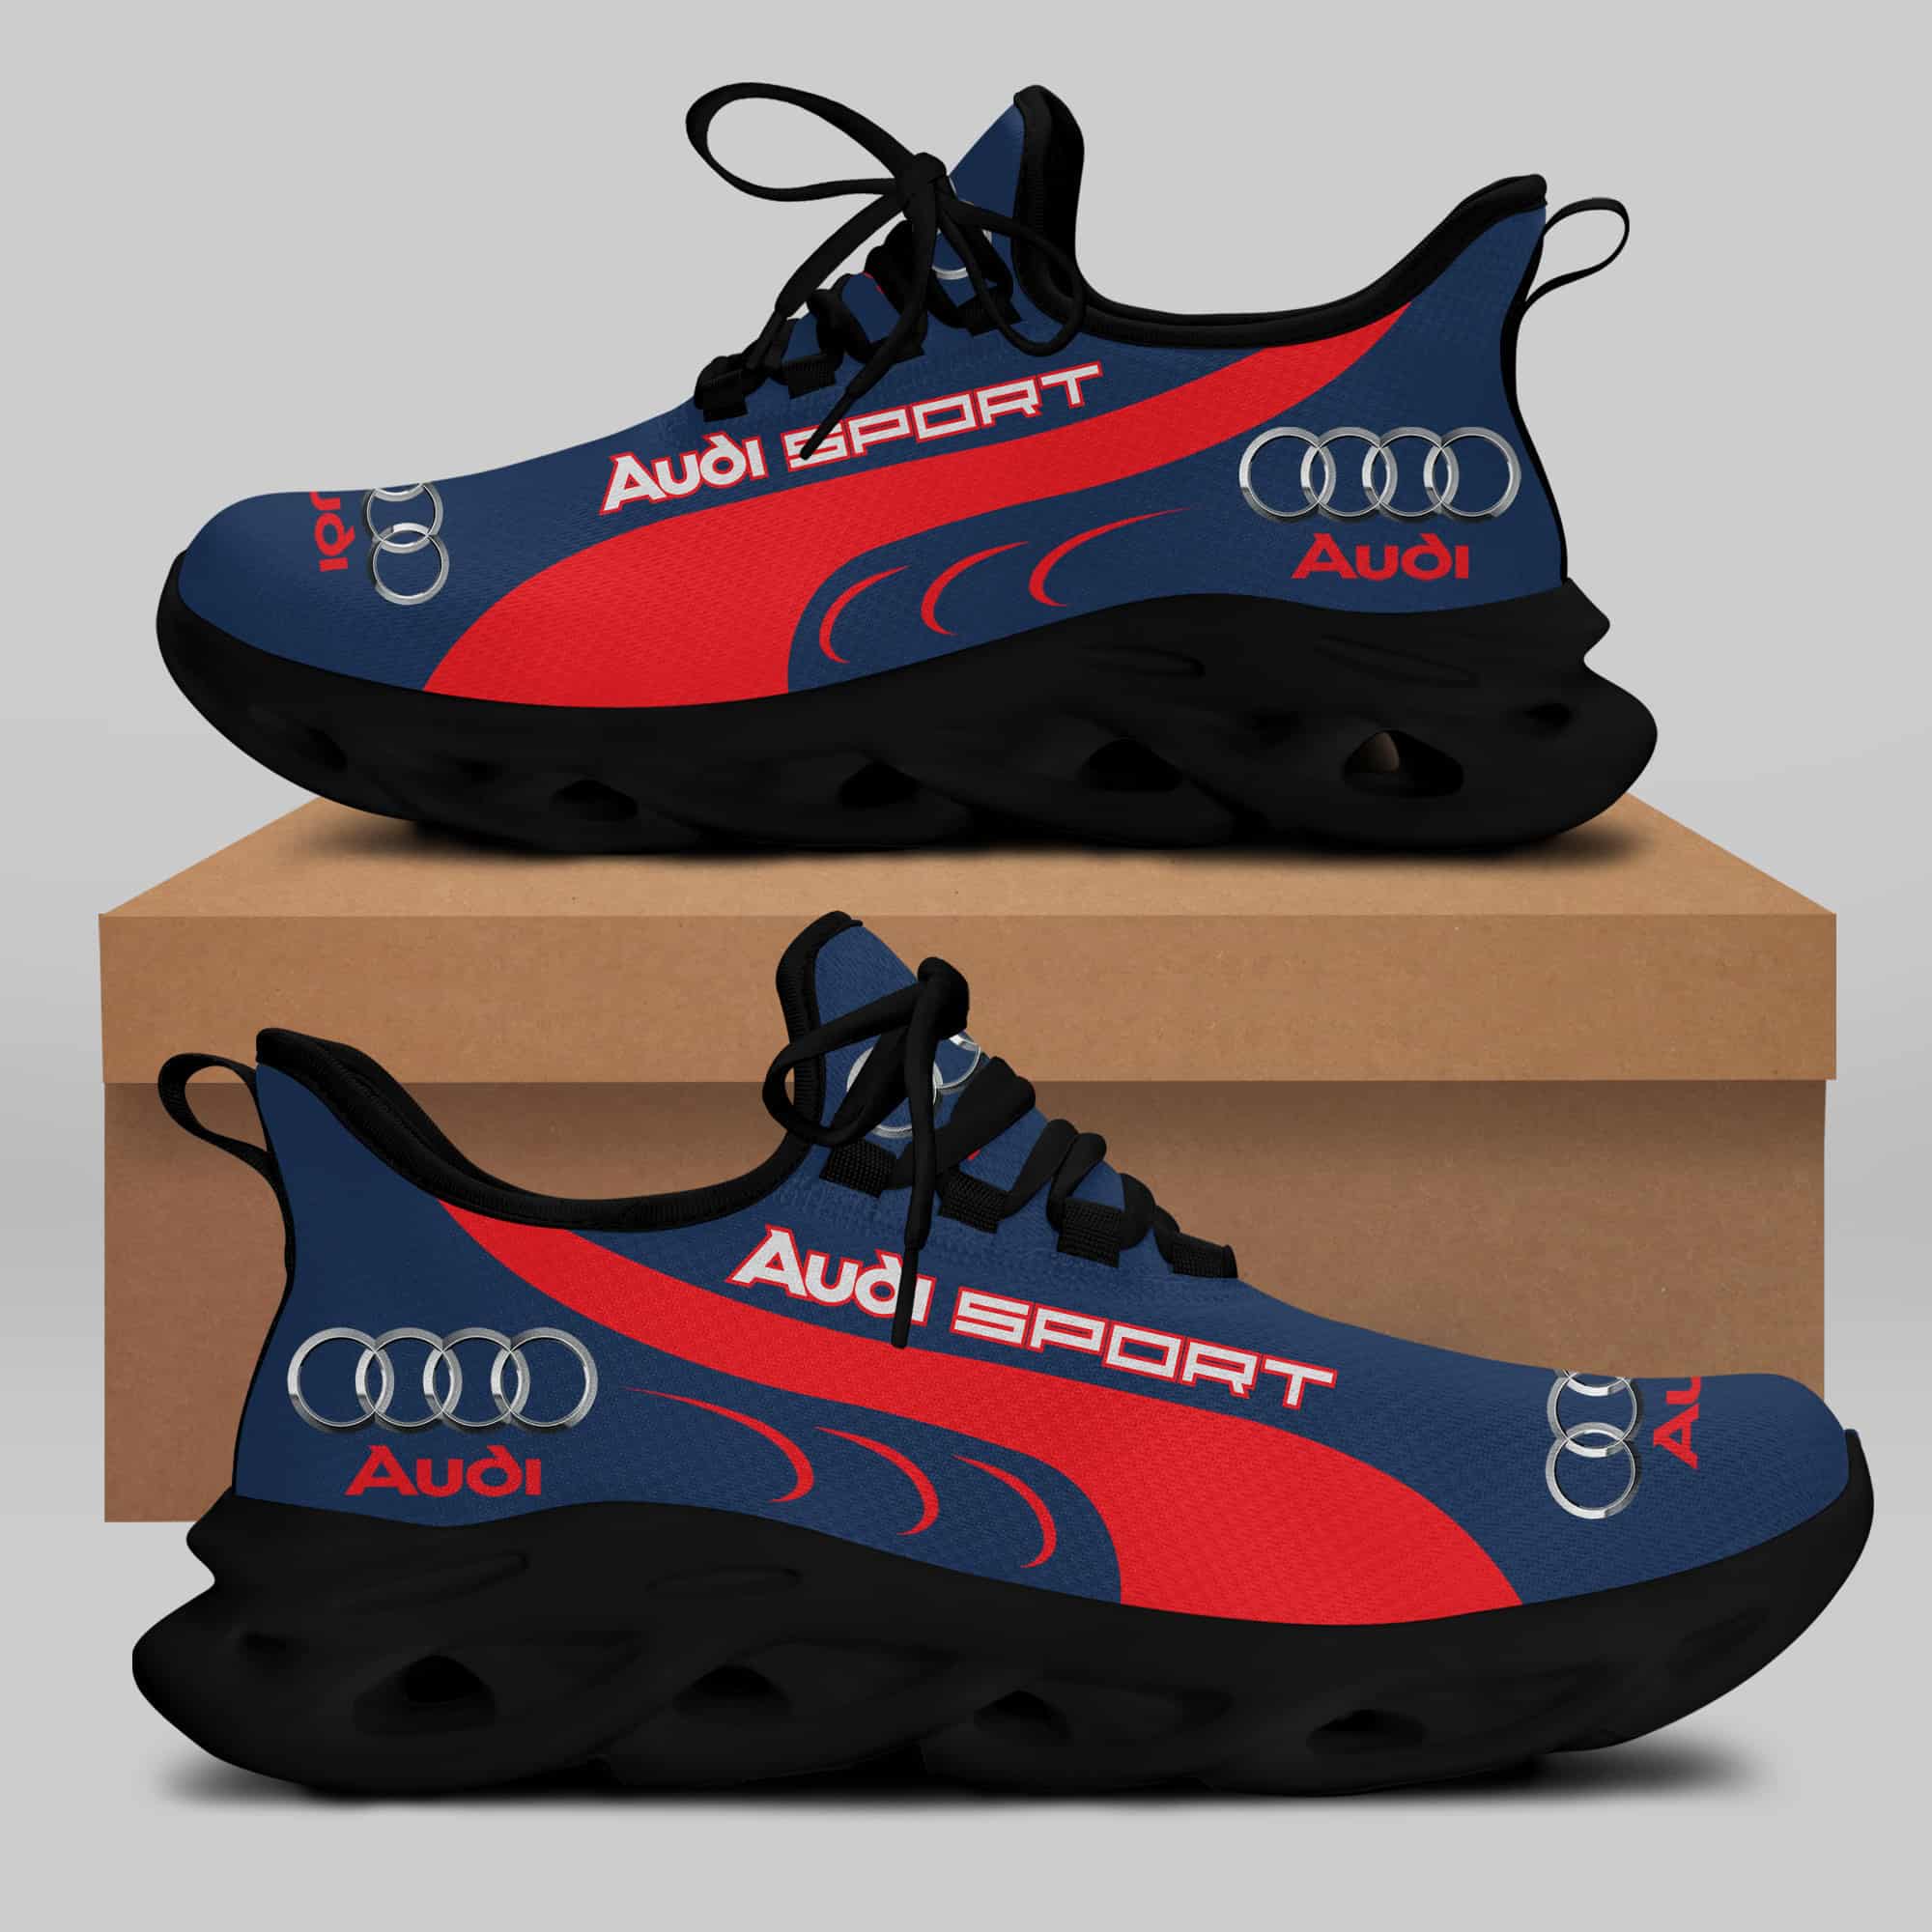 Audi Sport Running Shoes Max Soul Shoes Sneakers Ver 2 1